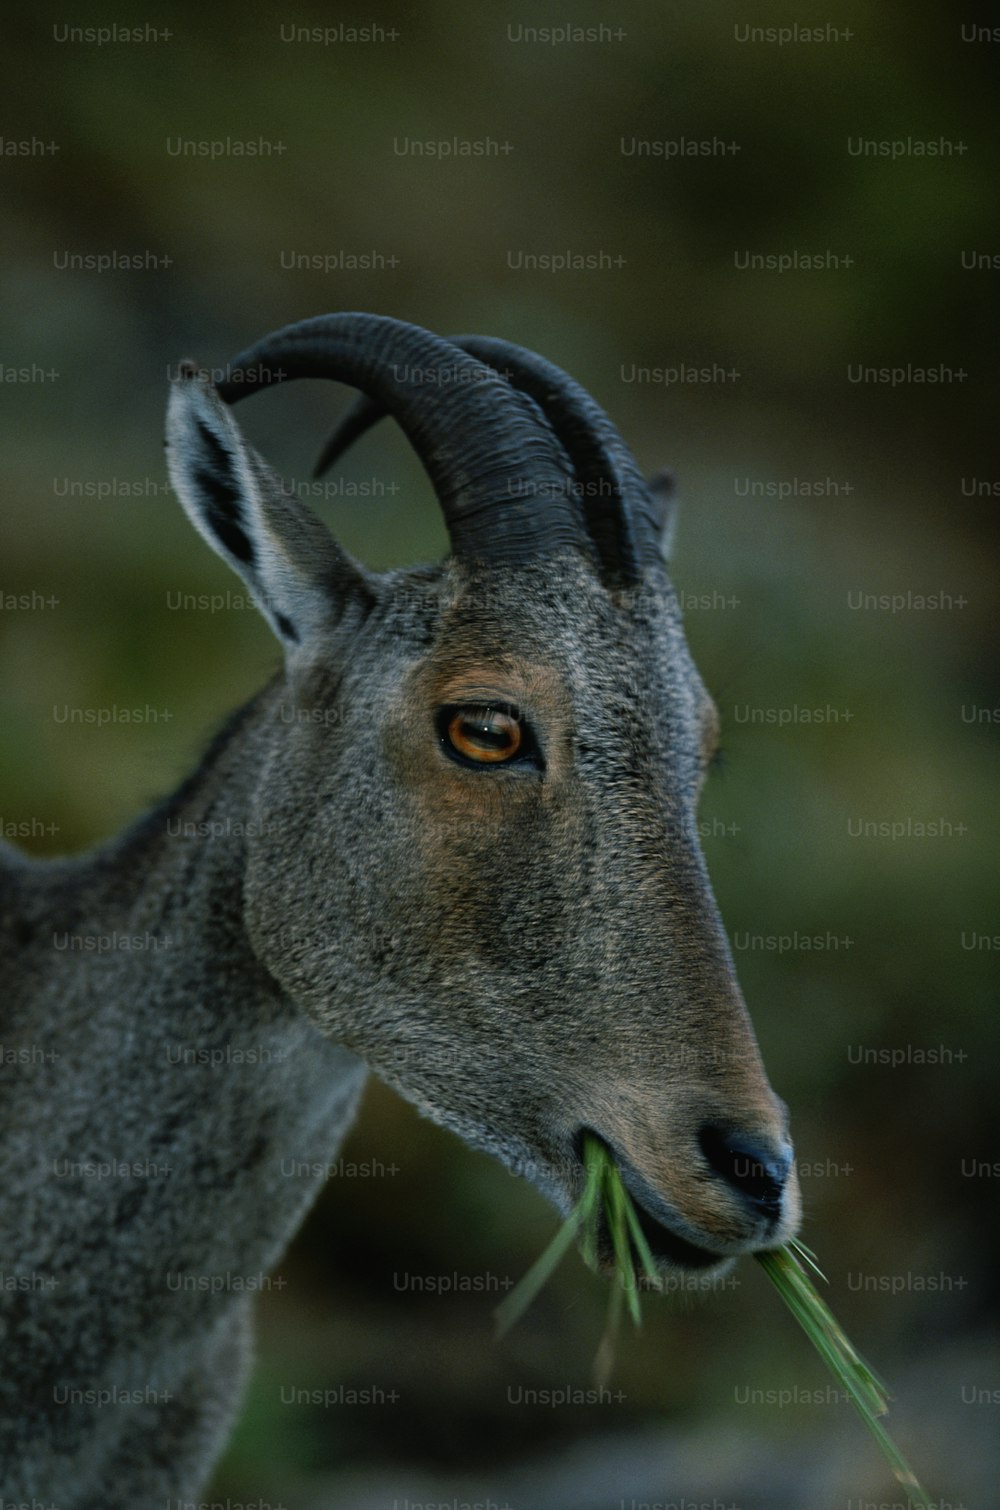 a close up of a goat with grass in its mouth